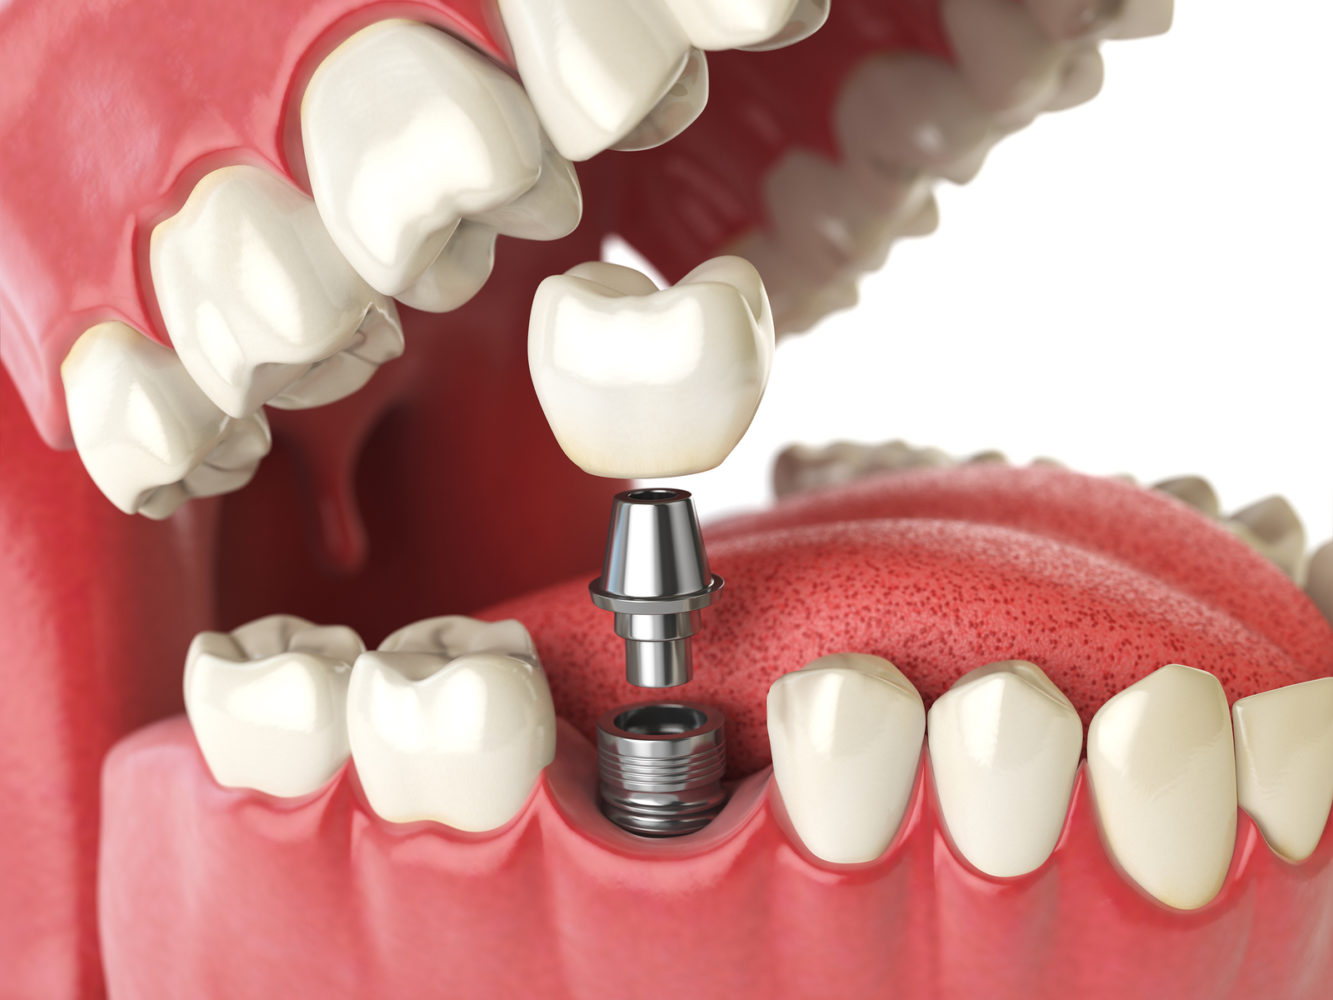 Dental Implants & Dentures: What’s the Difference?